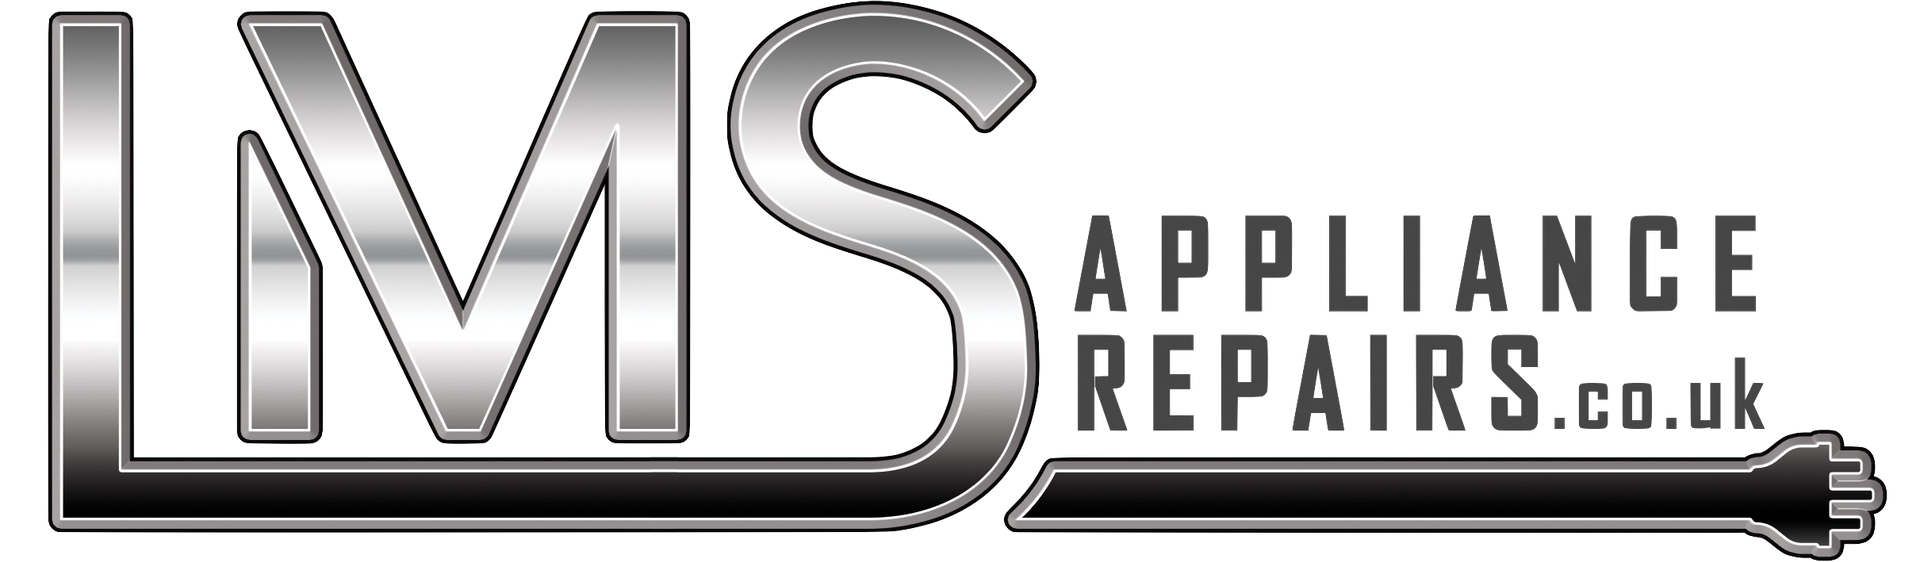 The logo for ims appliance repairs.co.uk